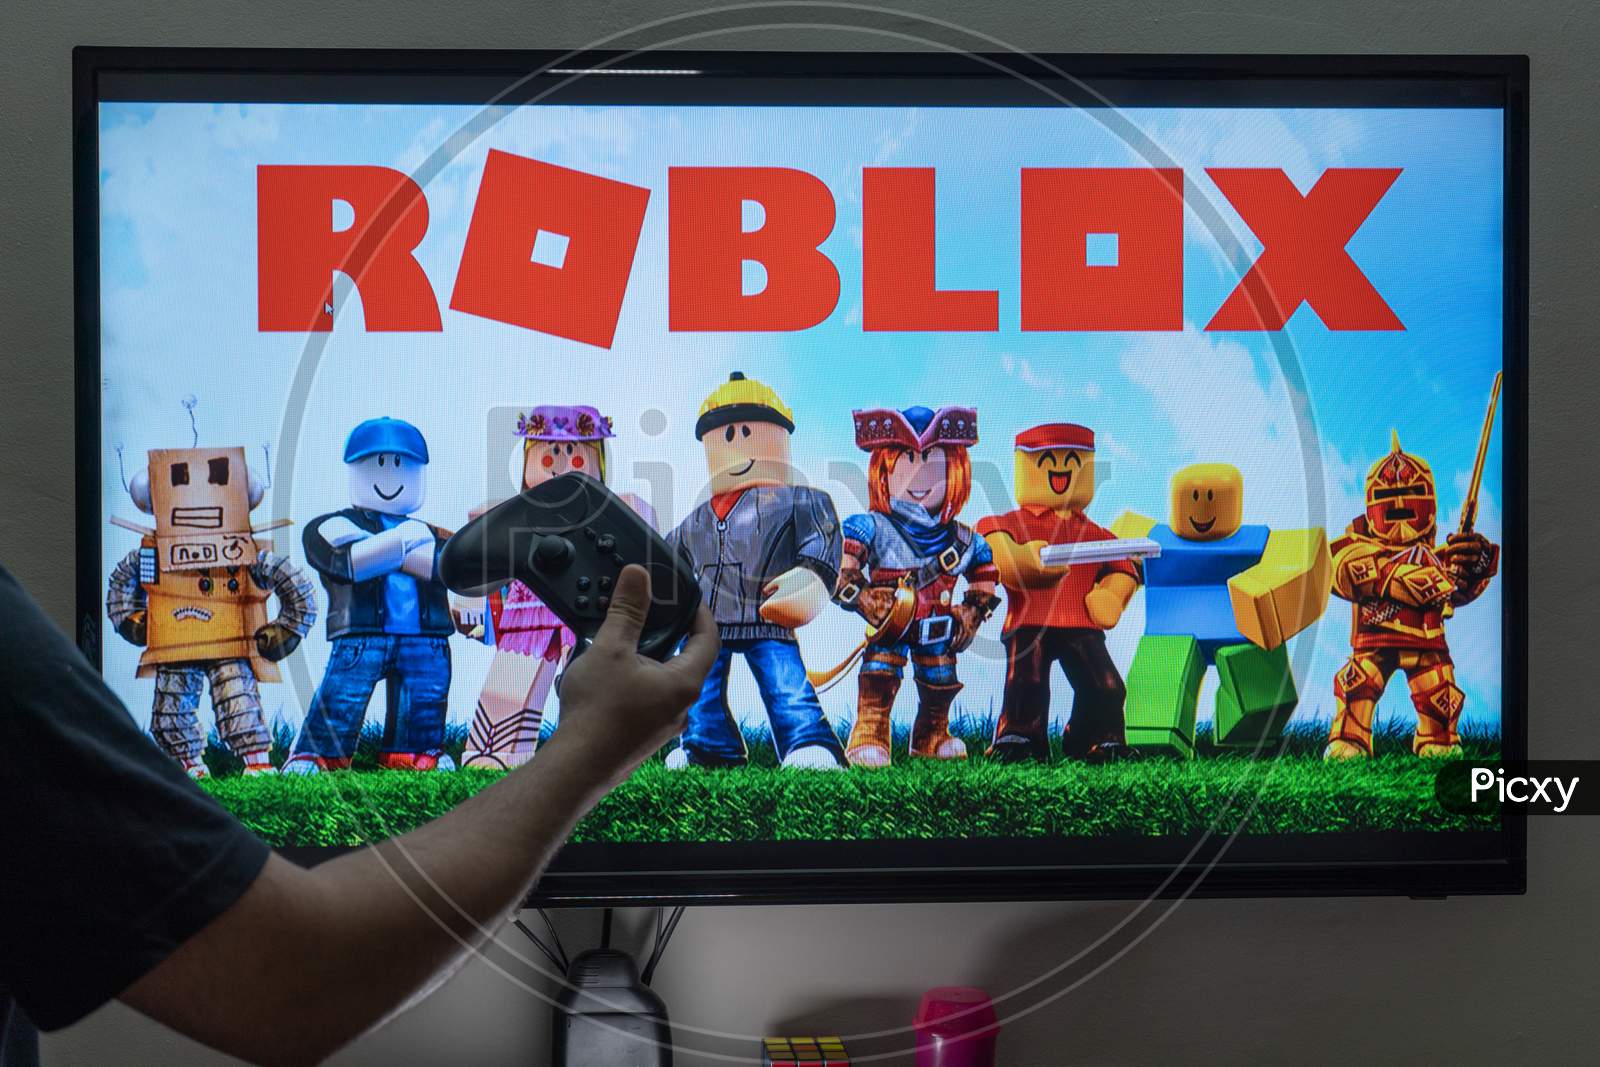 Image Of Man With A Controller Standing In Front Of A Pc Console Tv Screen With A Steam Controller Playing Popular Free To Play Game Roblox Et303787 Picxy - how to play roblox on pc with controller